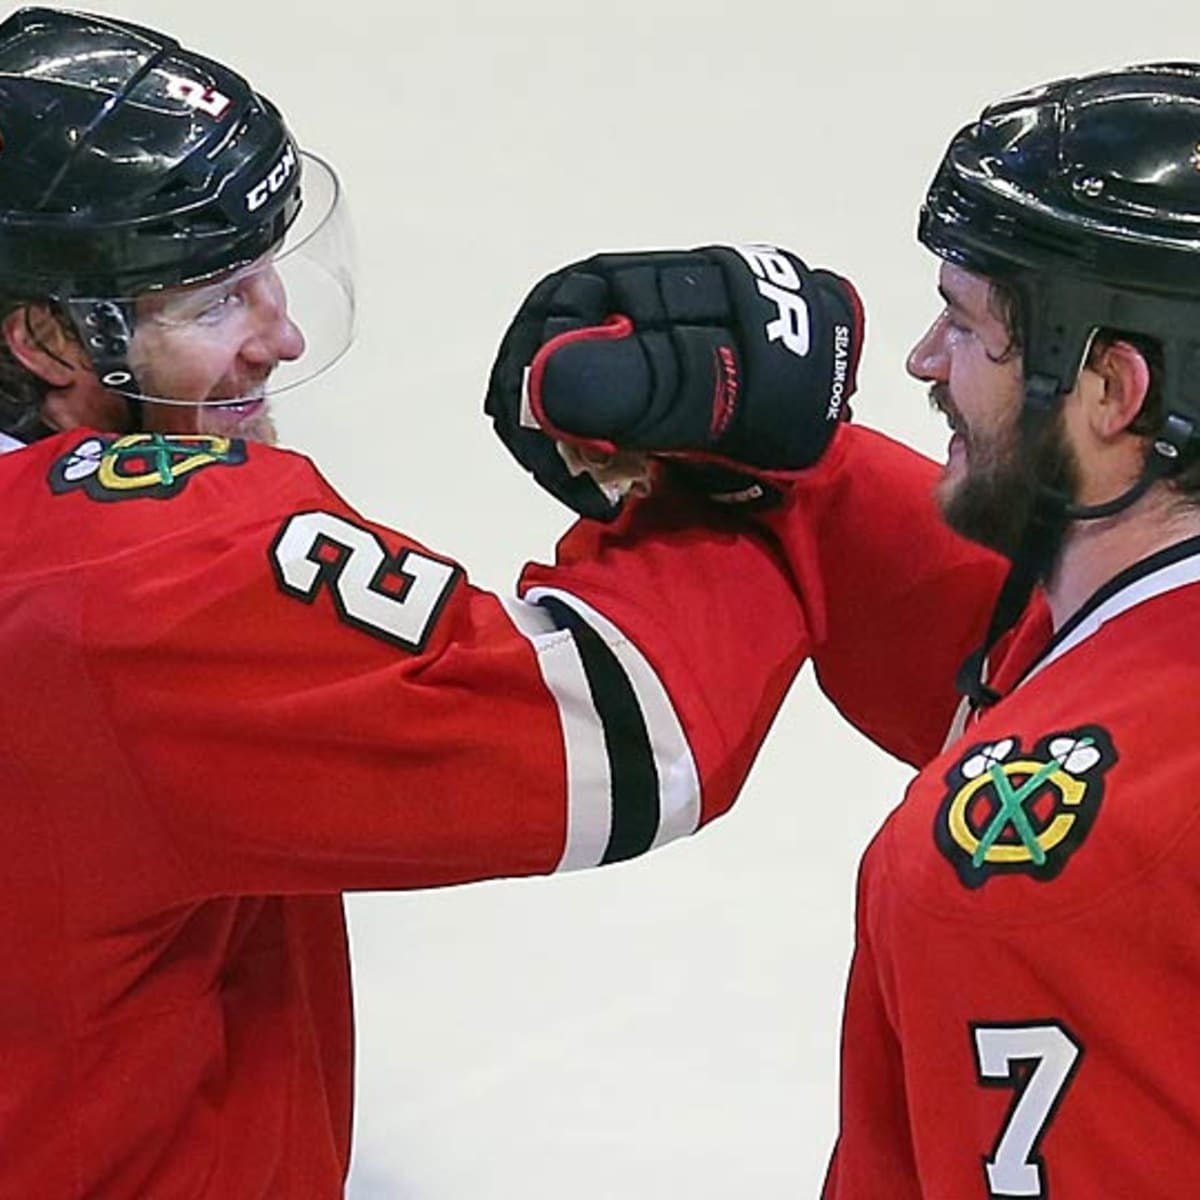 Could Duncan Keith be a good fit for the Maple Leafs? 